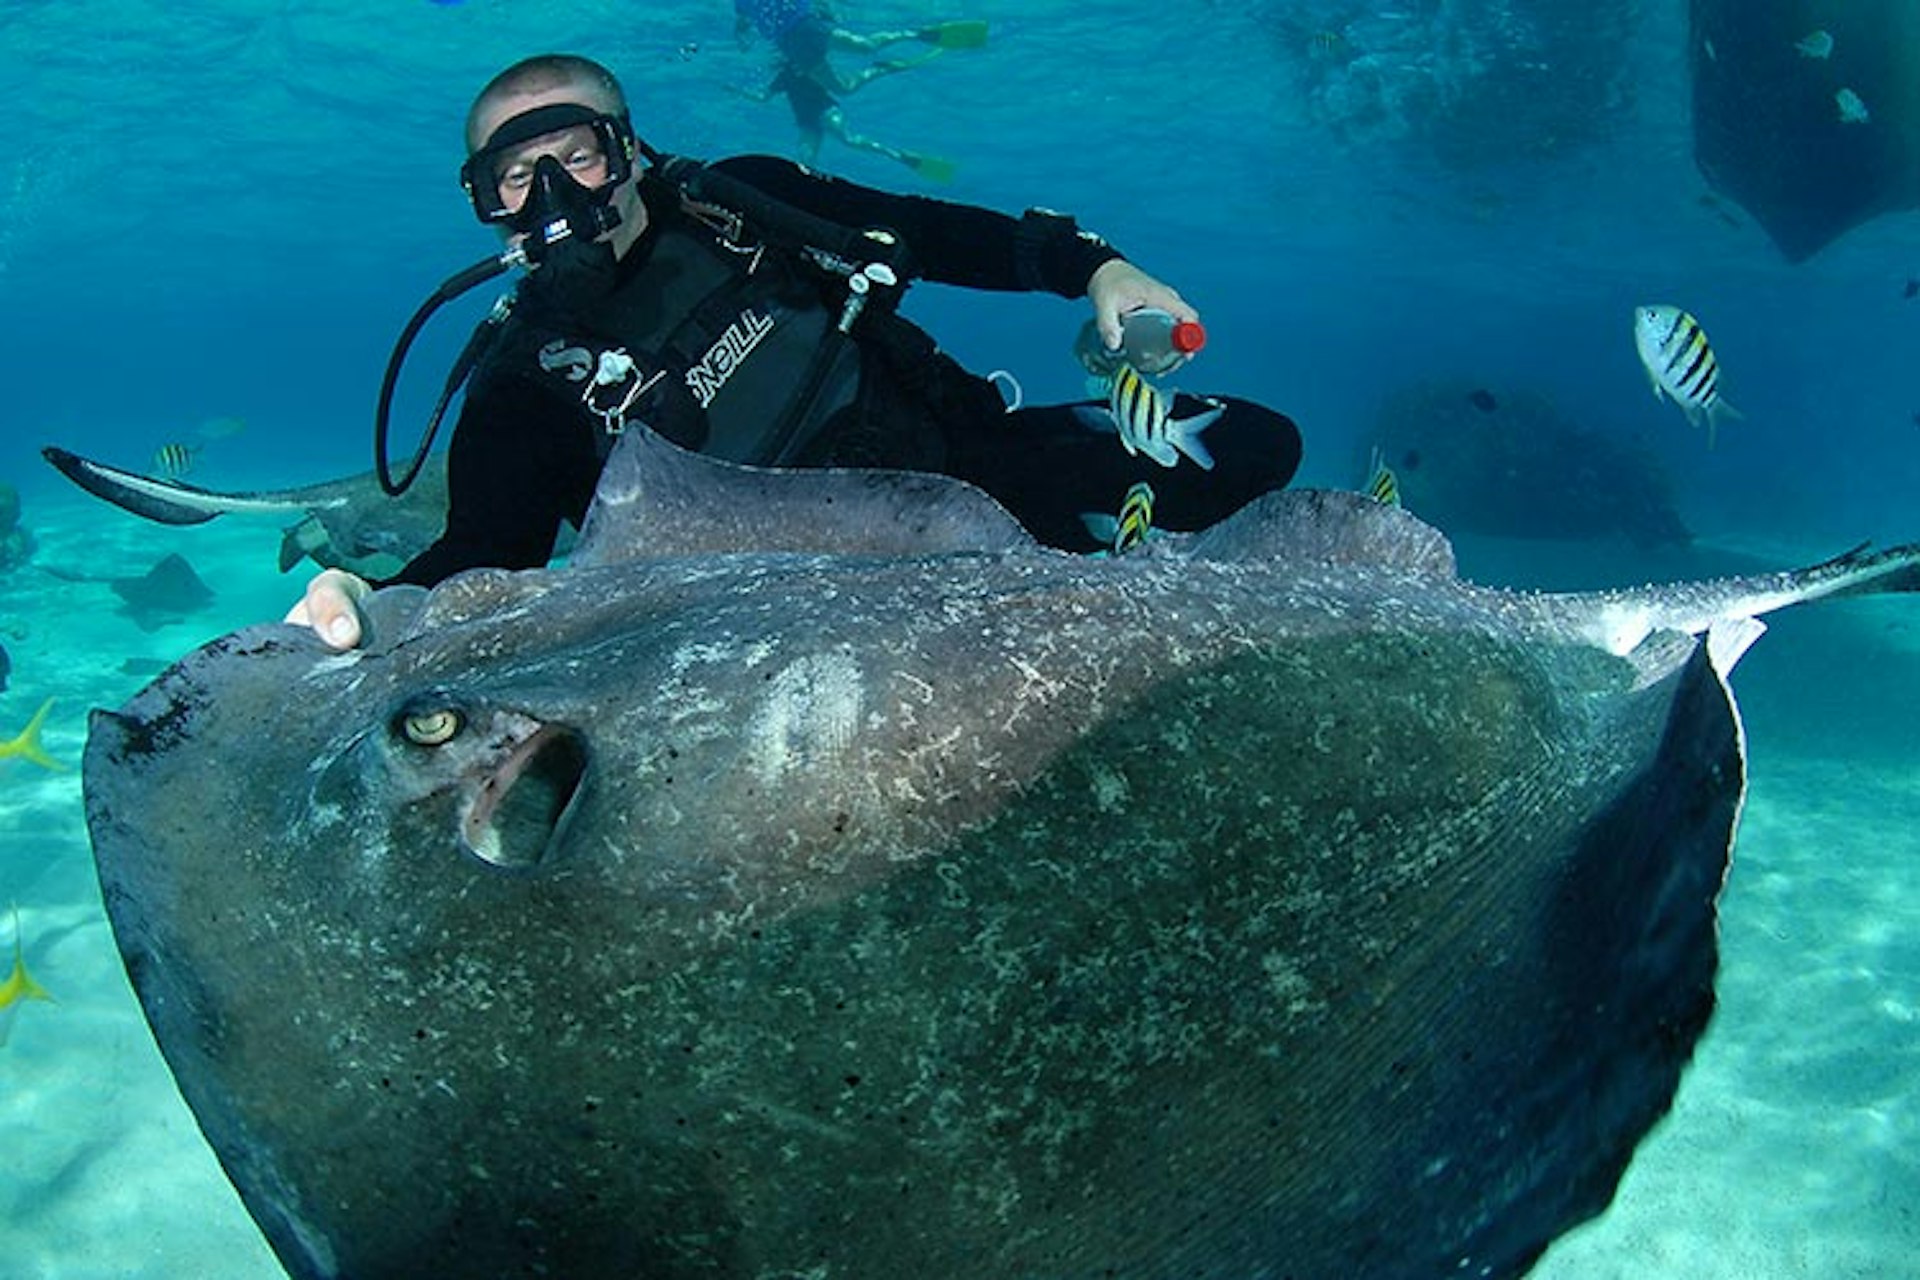 A diver getting touchy-feely with a southern stringray at Stringray City. Image by Lawson Wood / Lonely Planet.